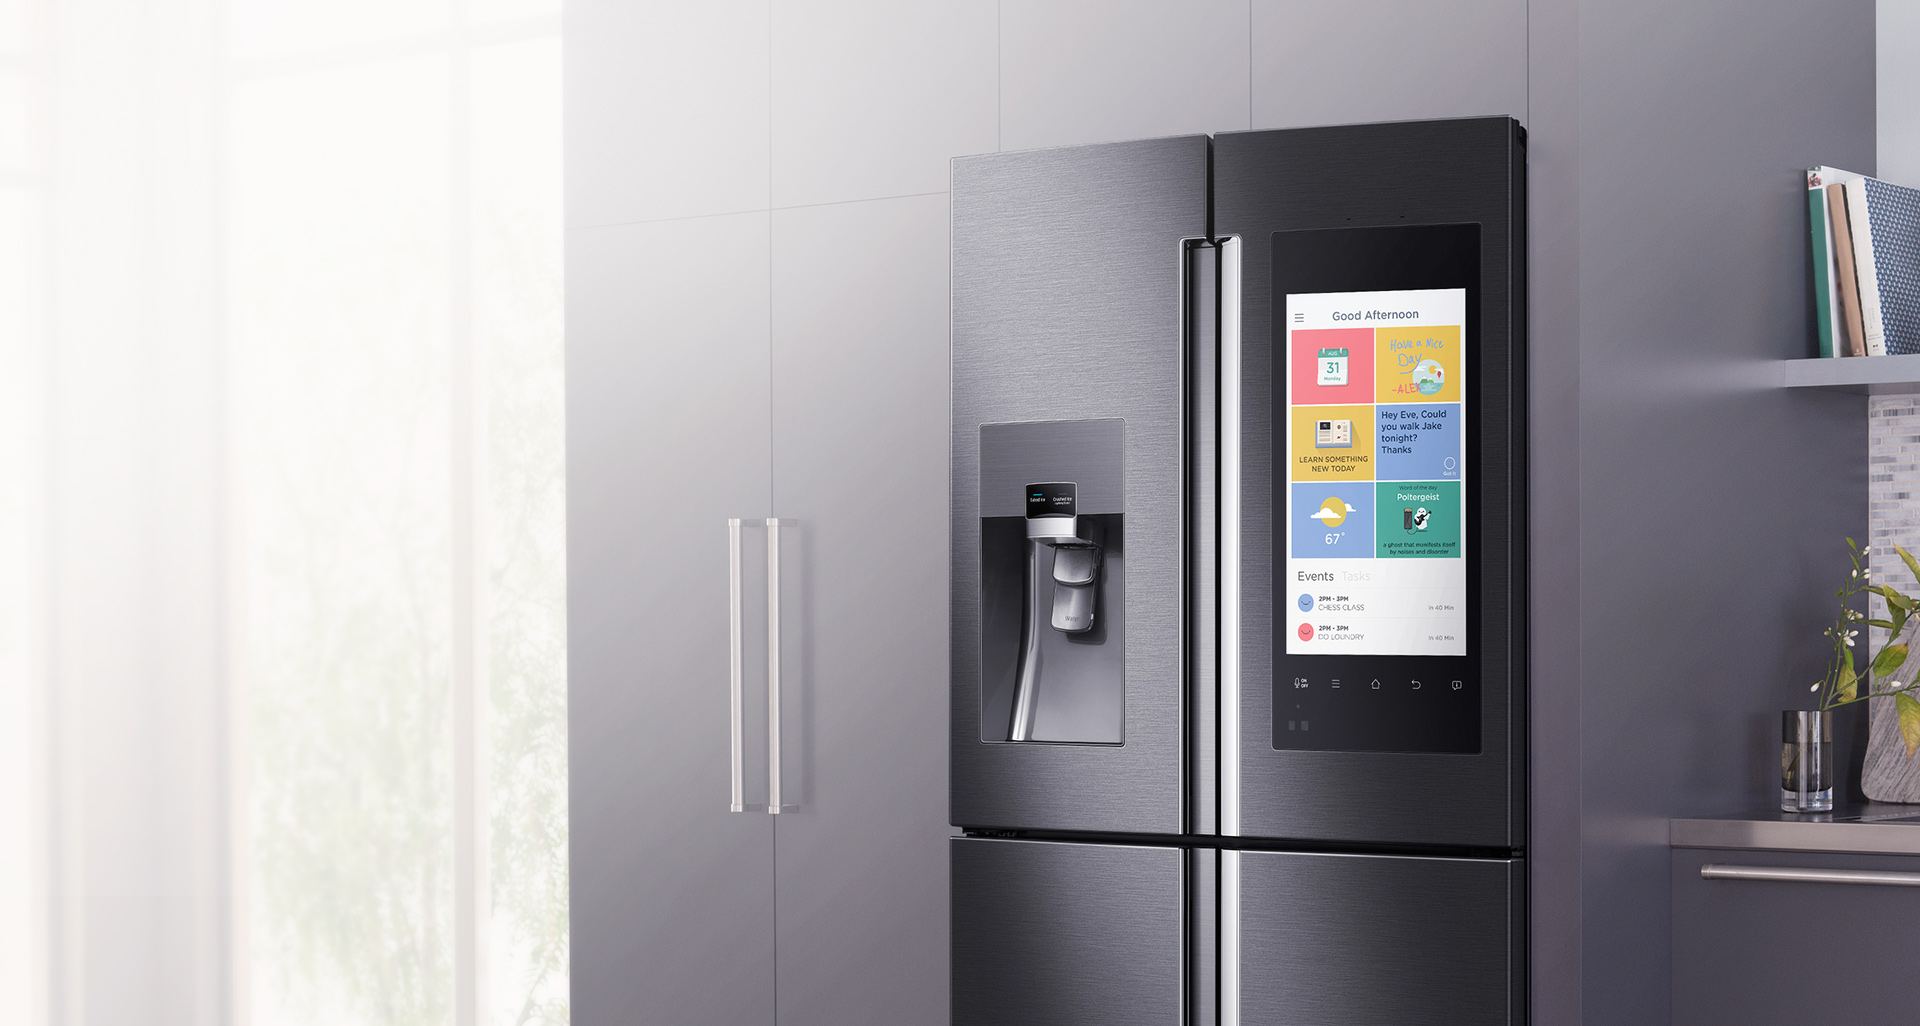 Smart Refrigerator from Your Smartphone